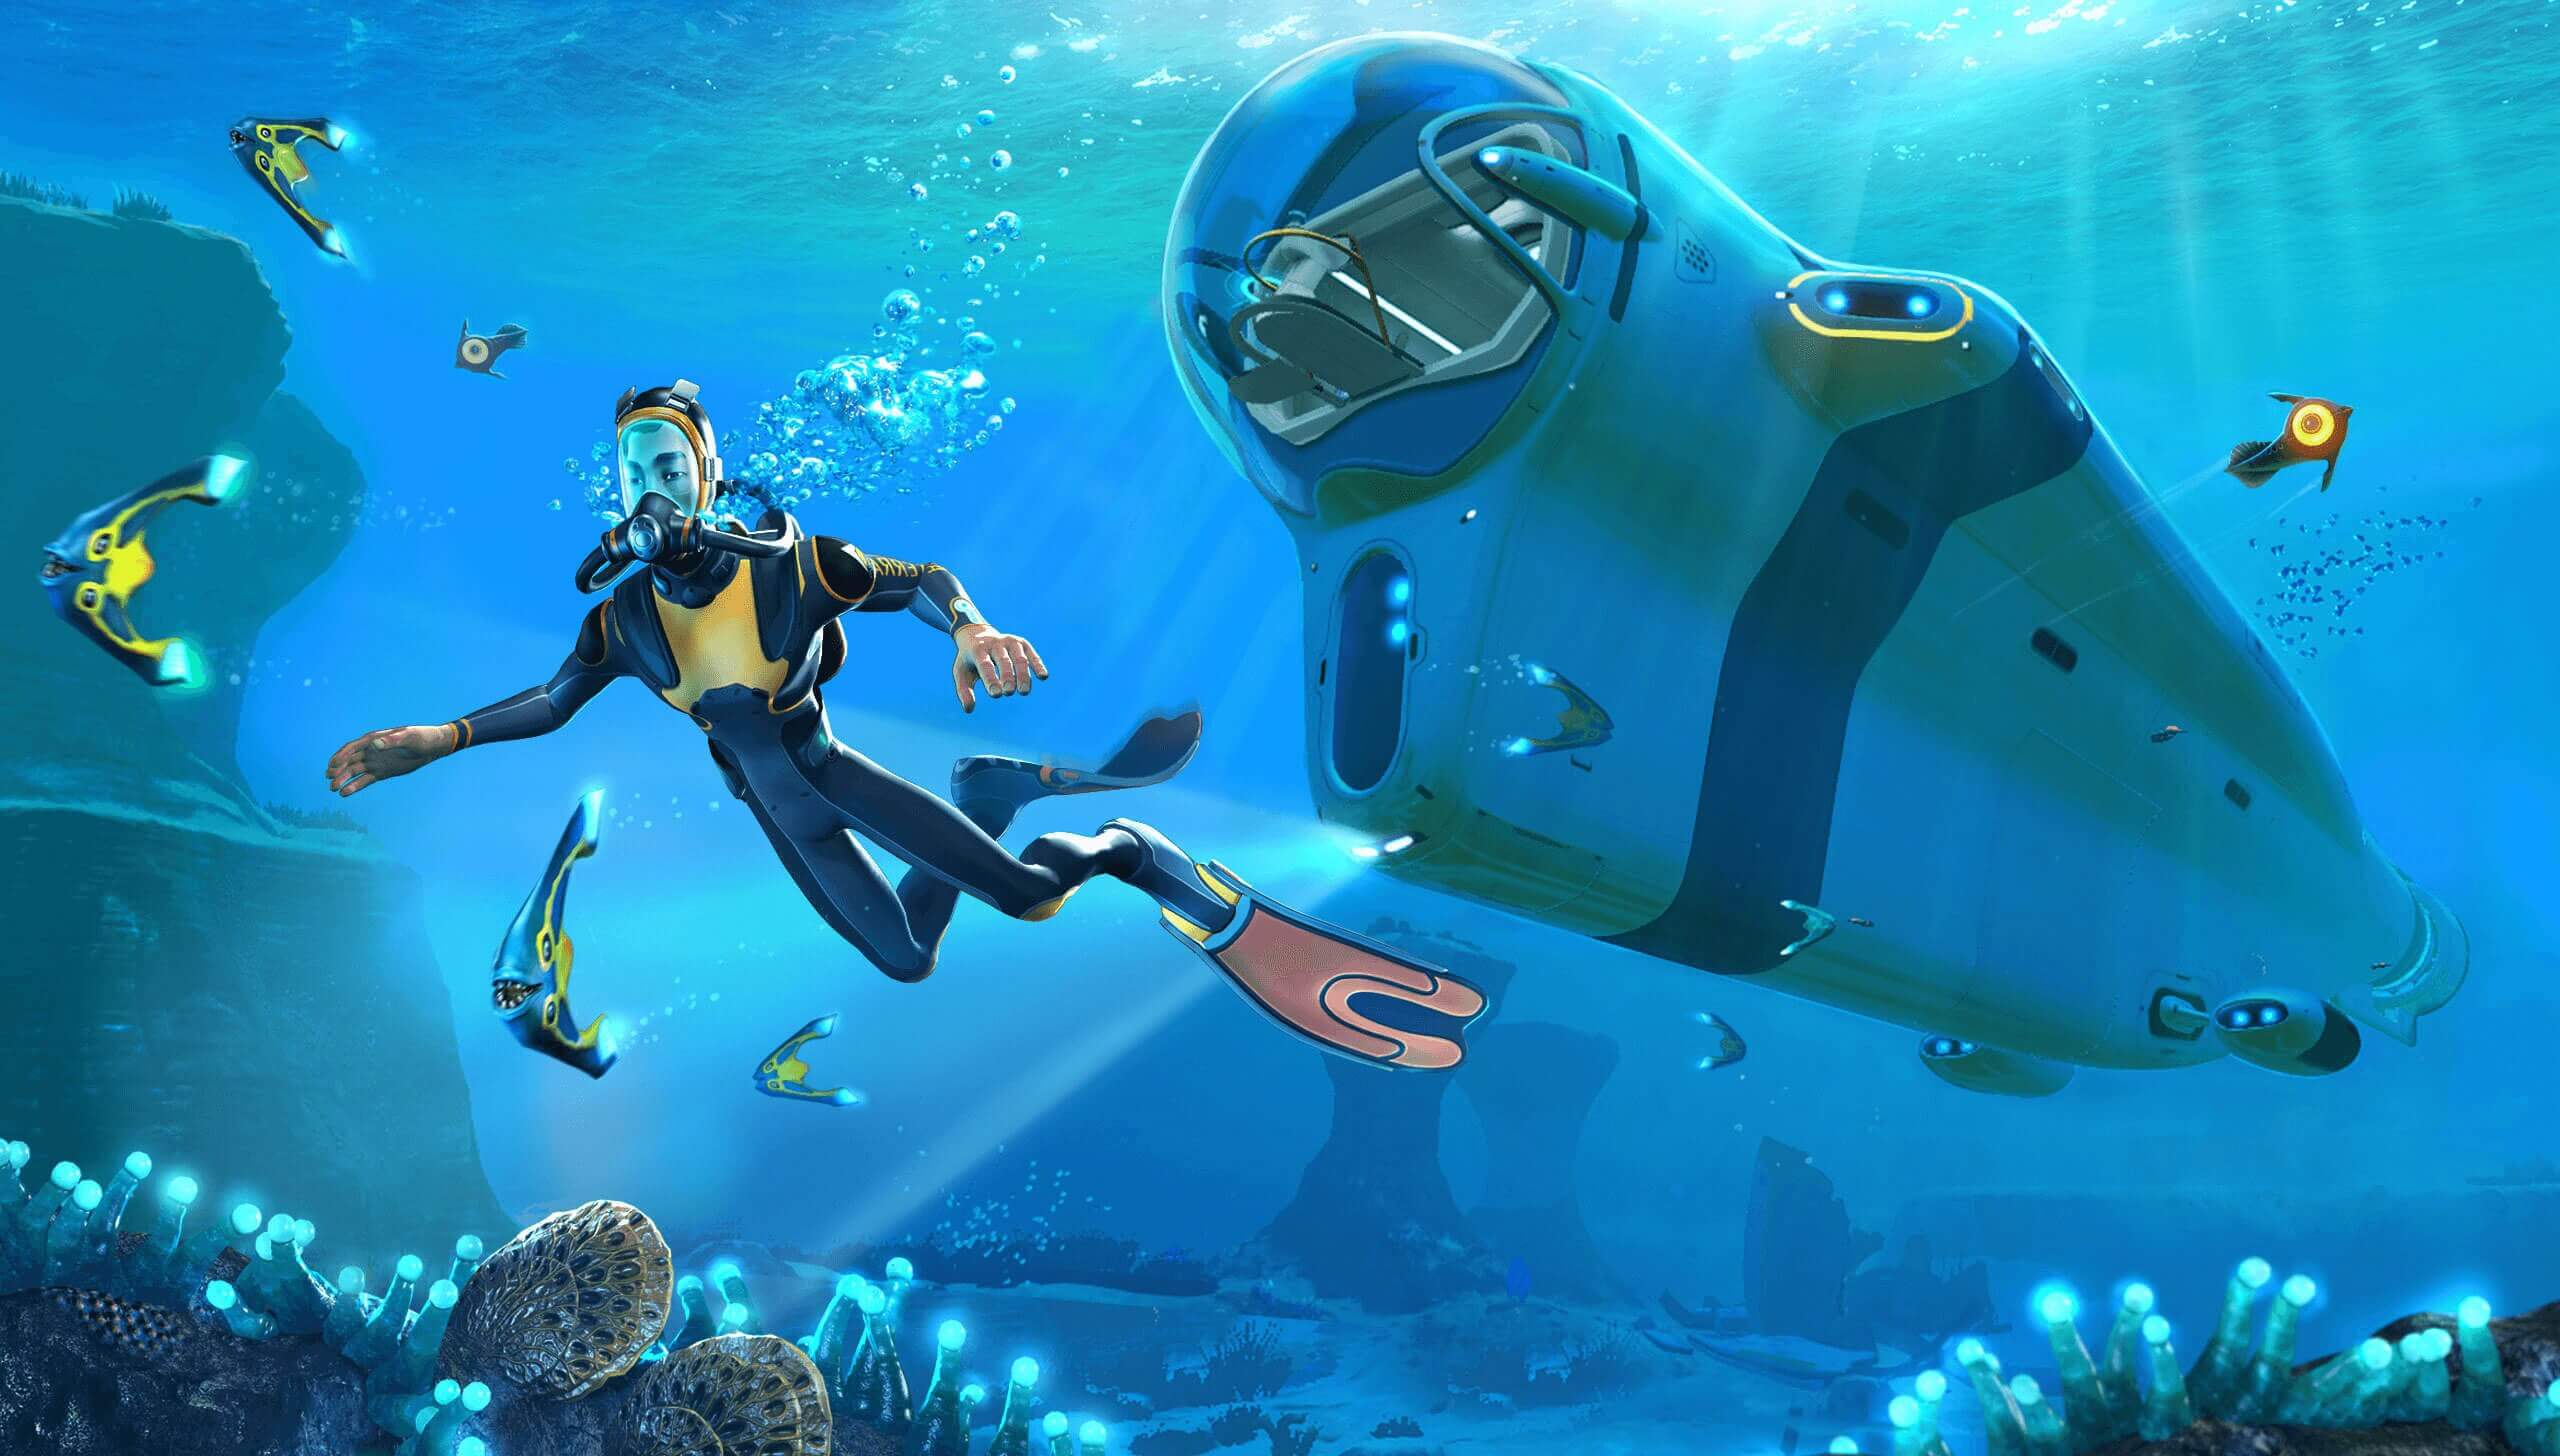 Nintendo Switch gets two Subnautica ports in 2021